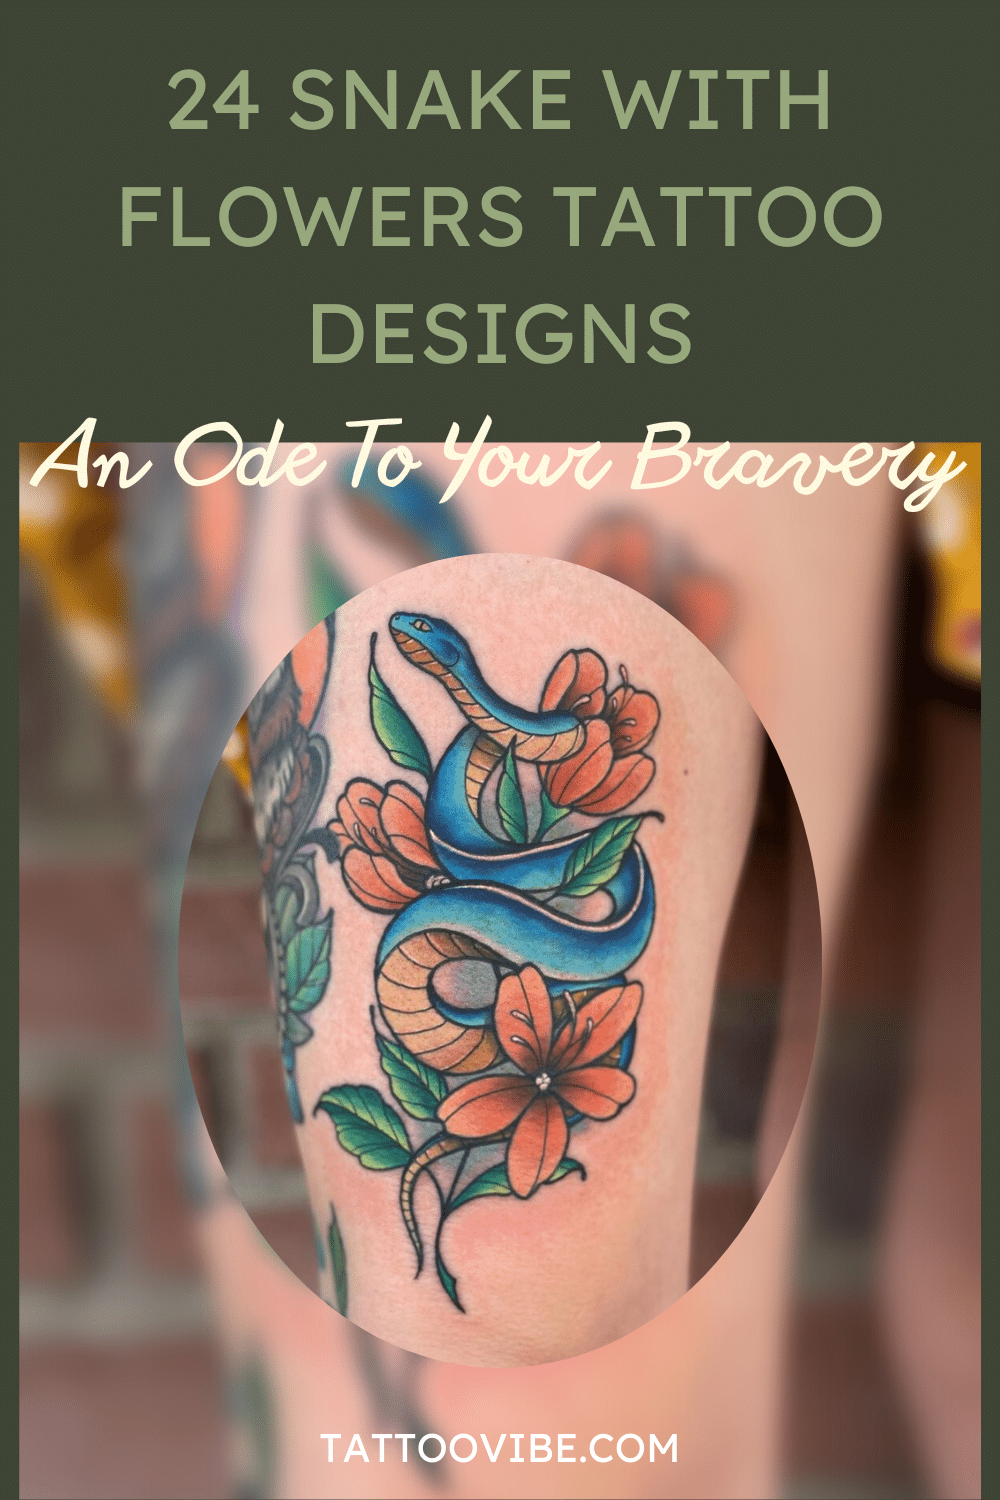 An Ode To Your Bravery: 24 Snake With Flowers Tattoo Designs